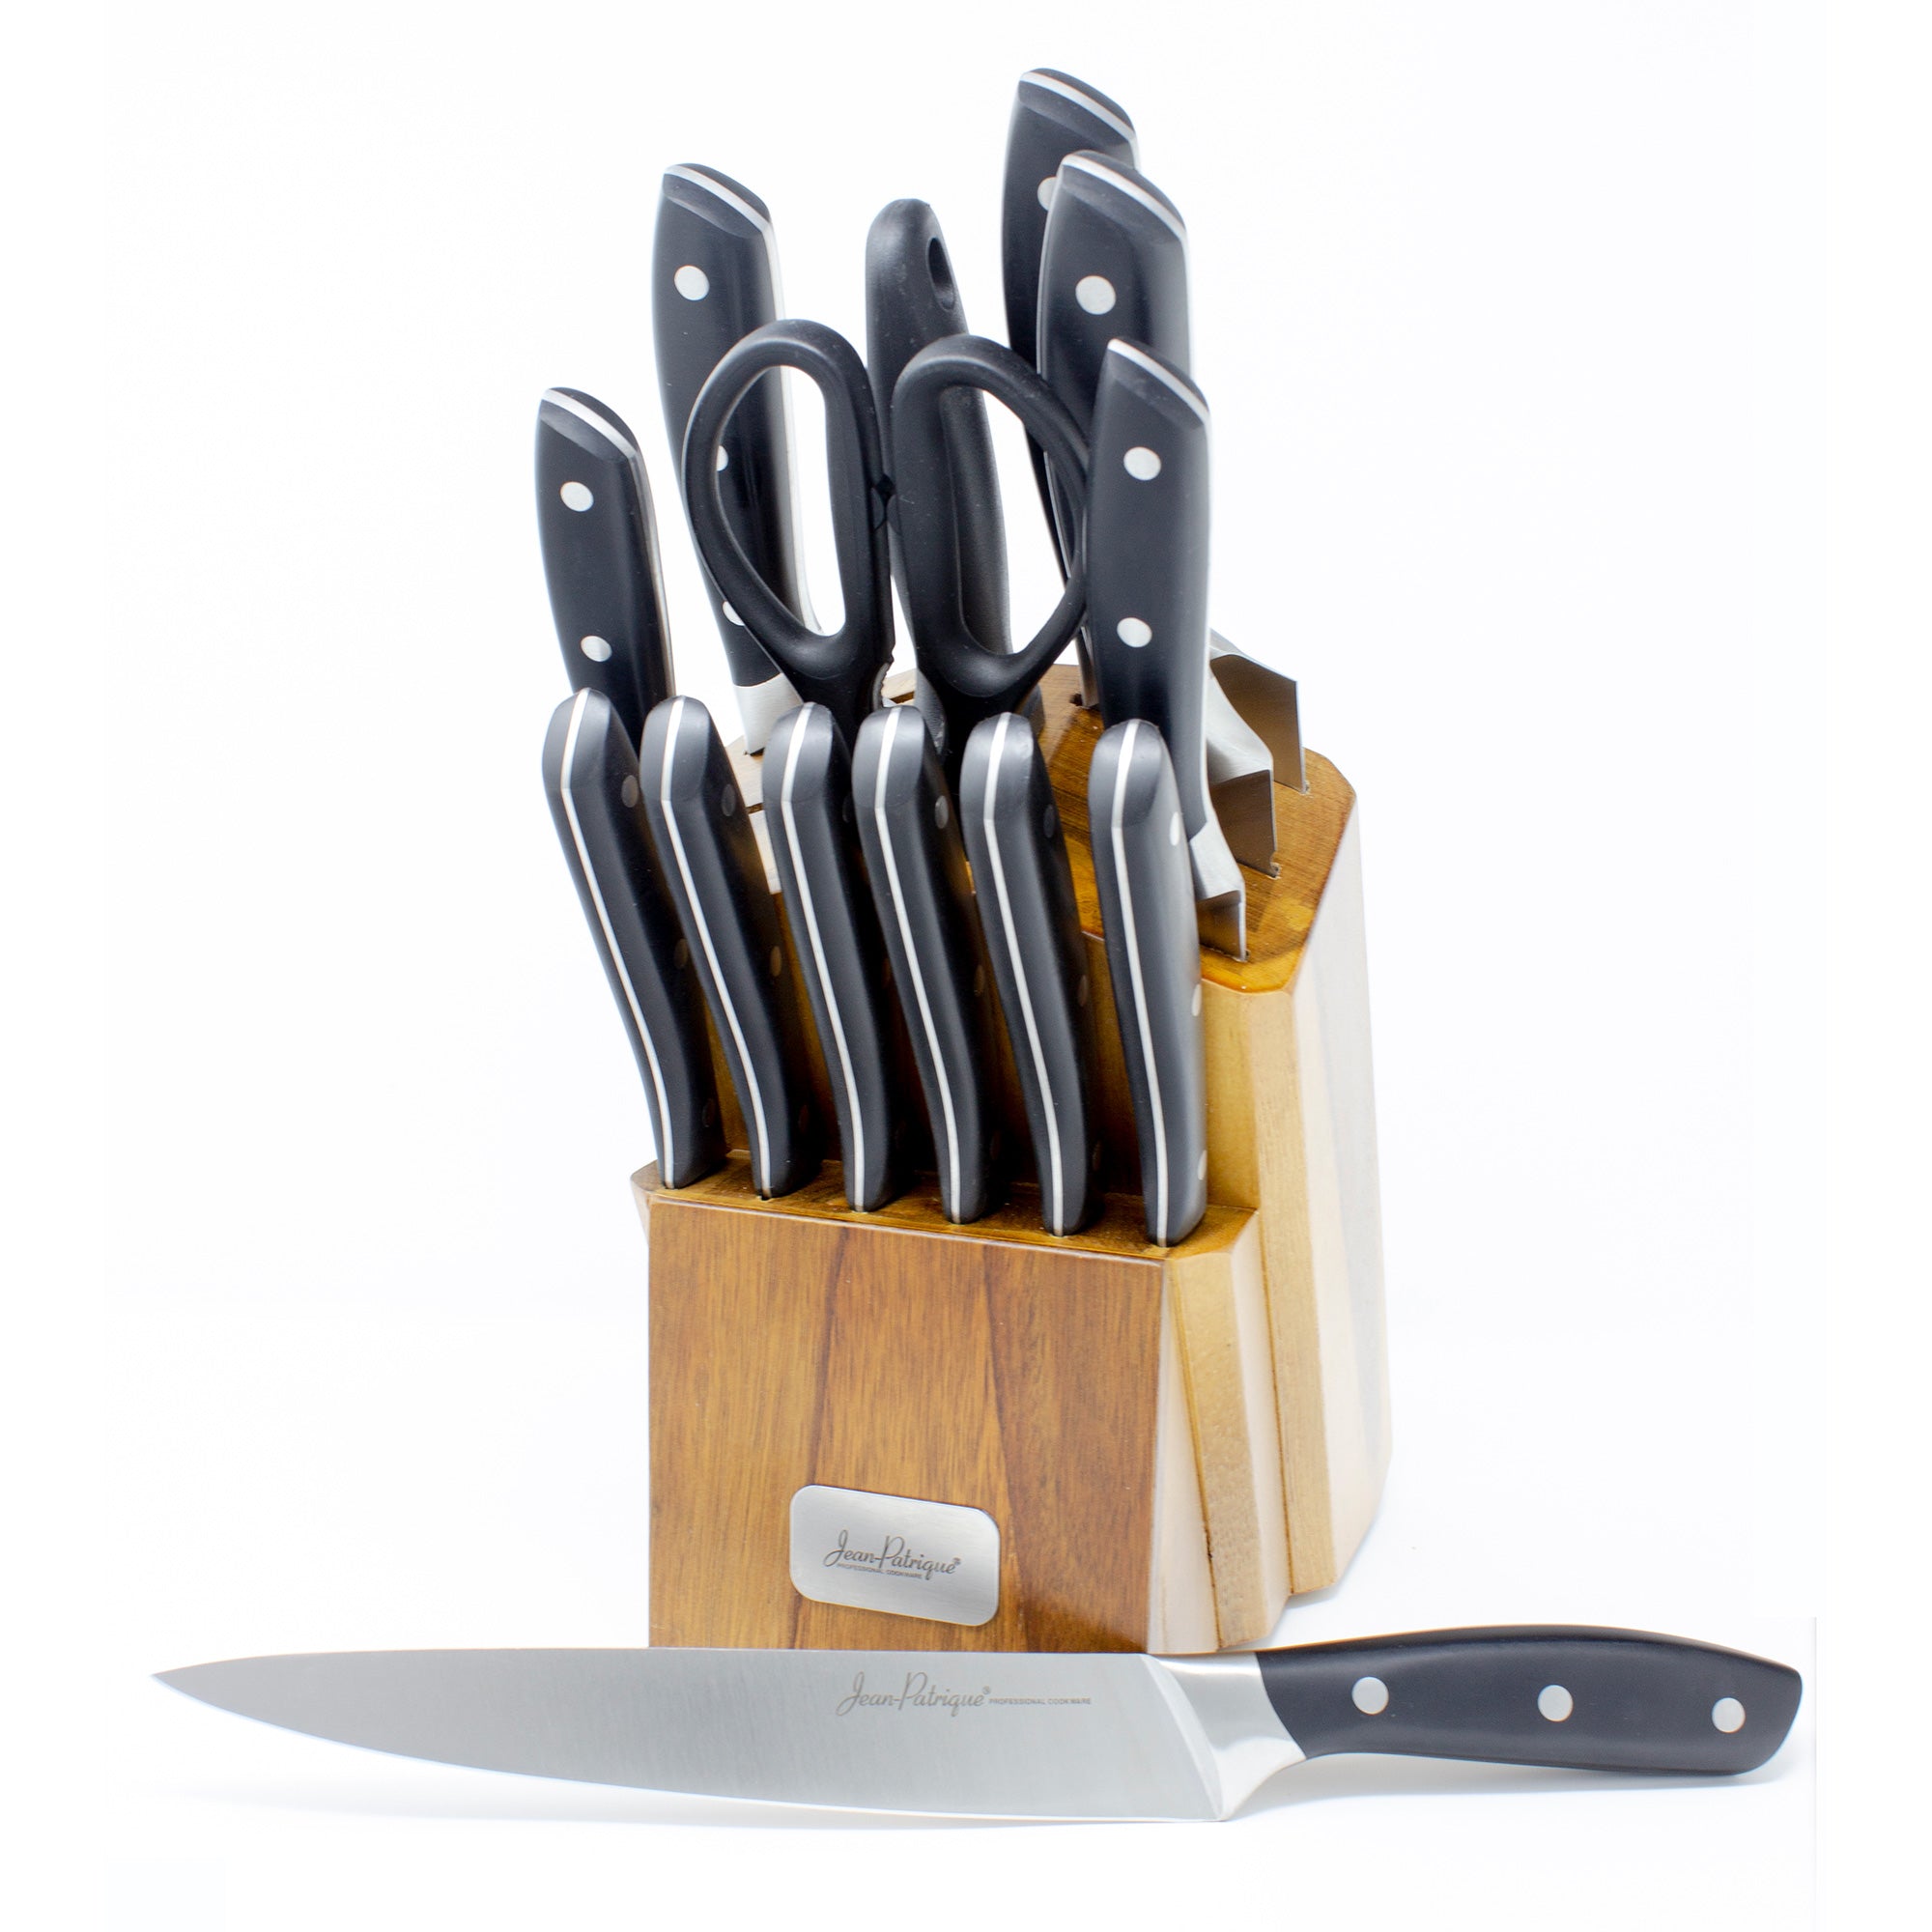 Jean Patrique Chopaholic 3 Piece Chef's Knife Set with Professional Bamboo Knife Block and Chopping Board, Stainless Steel